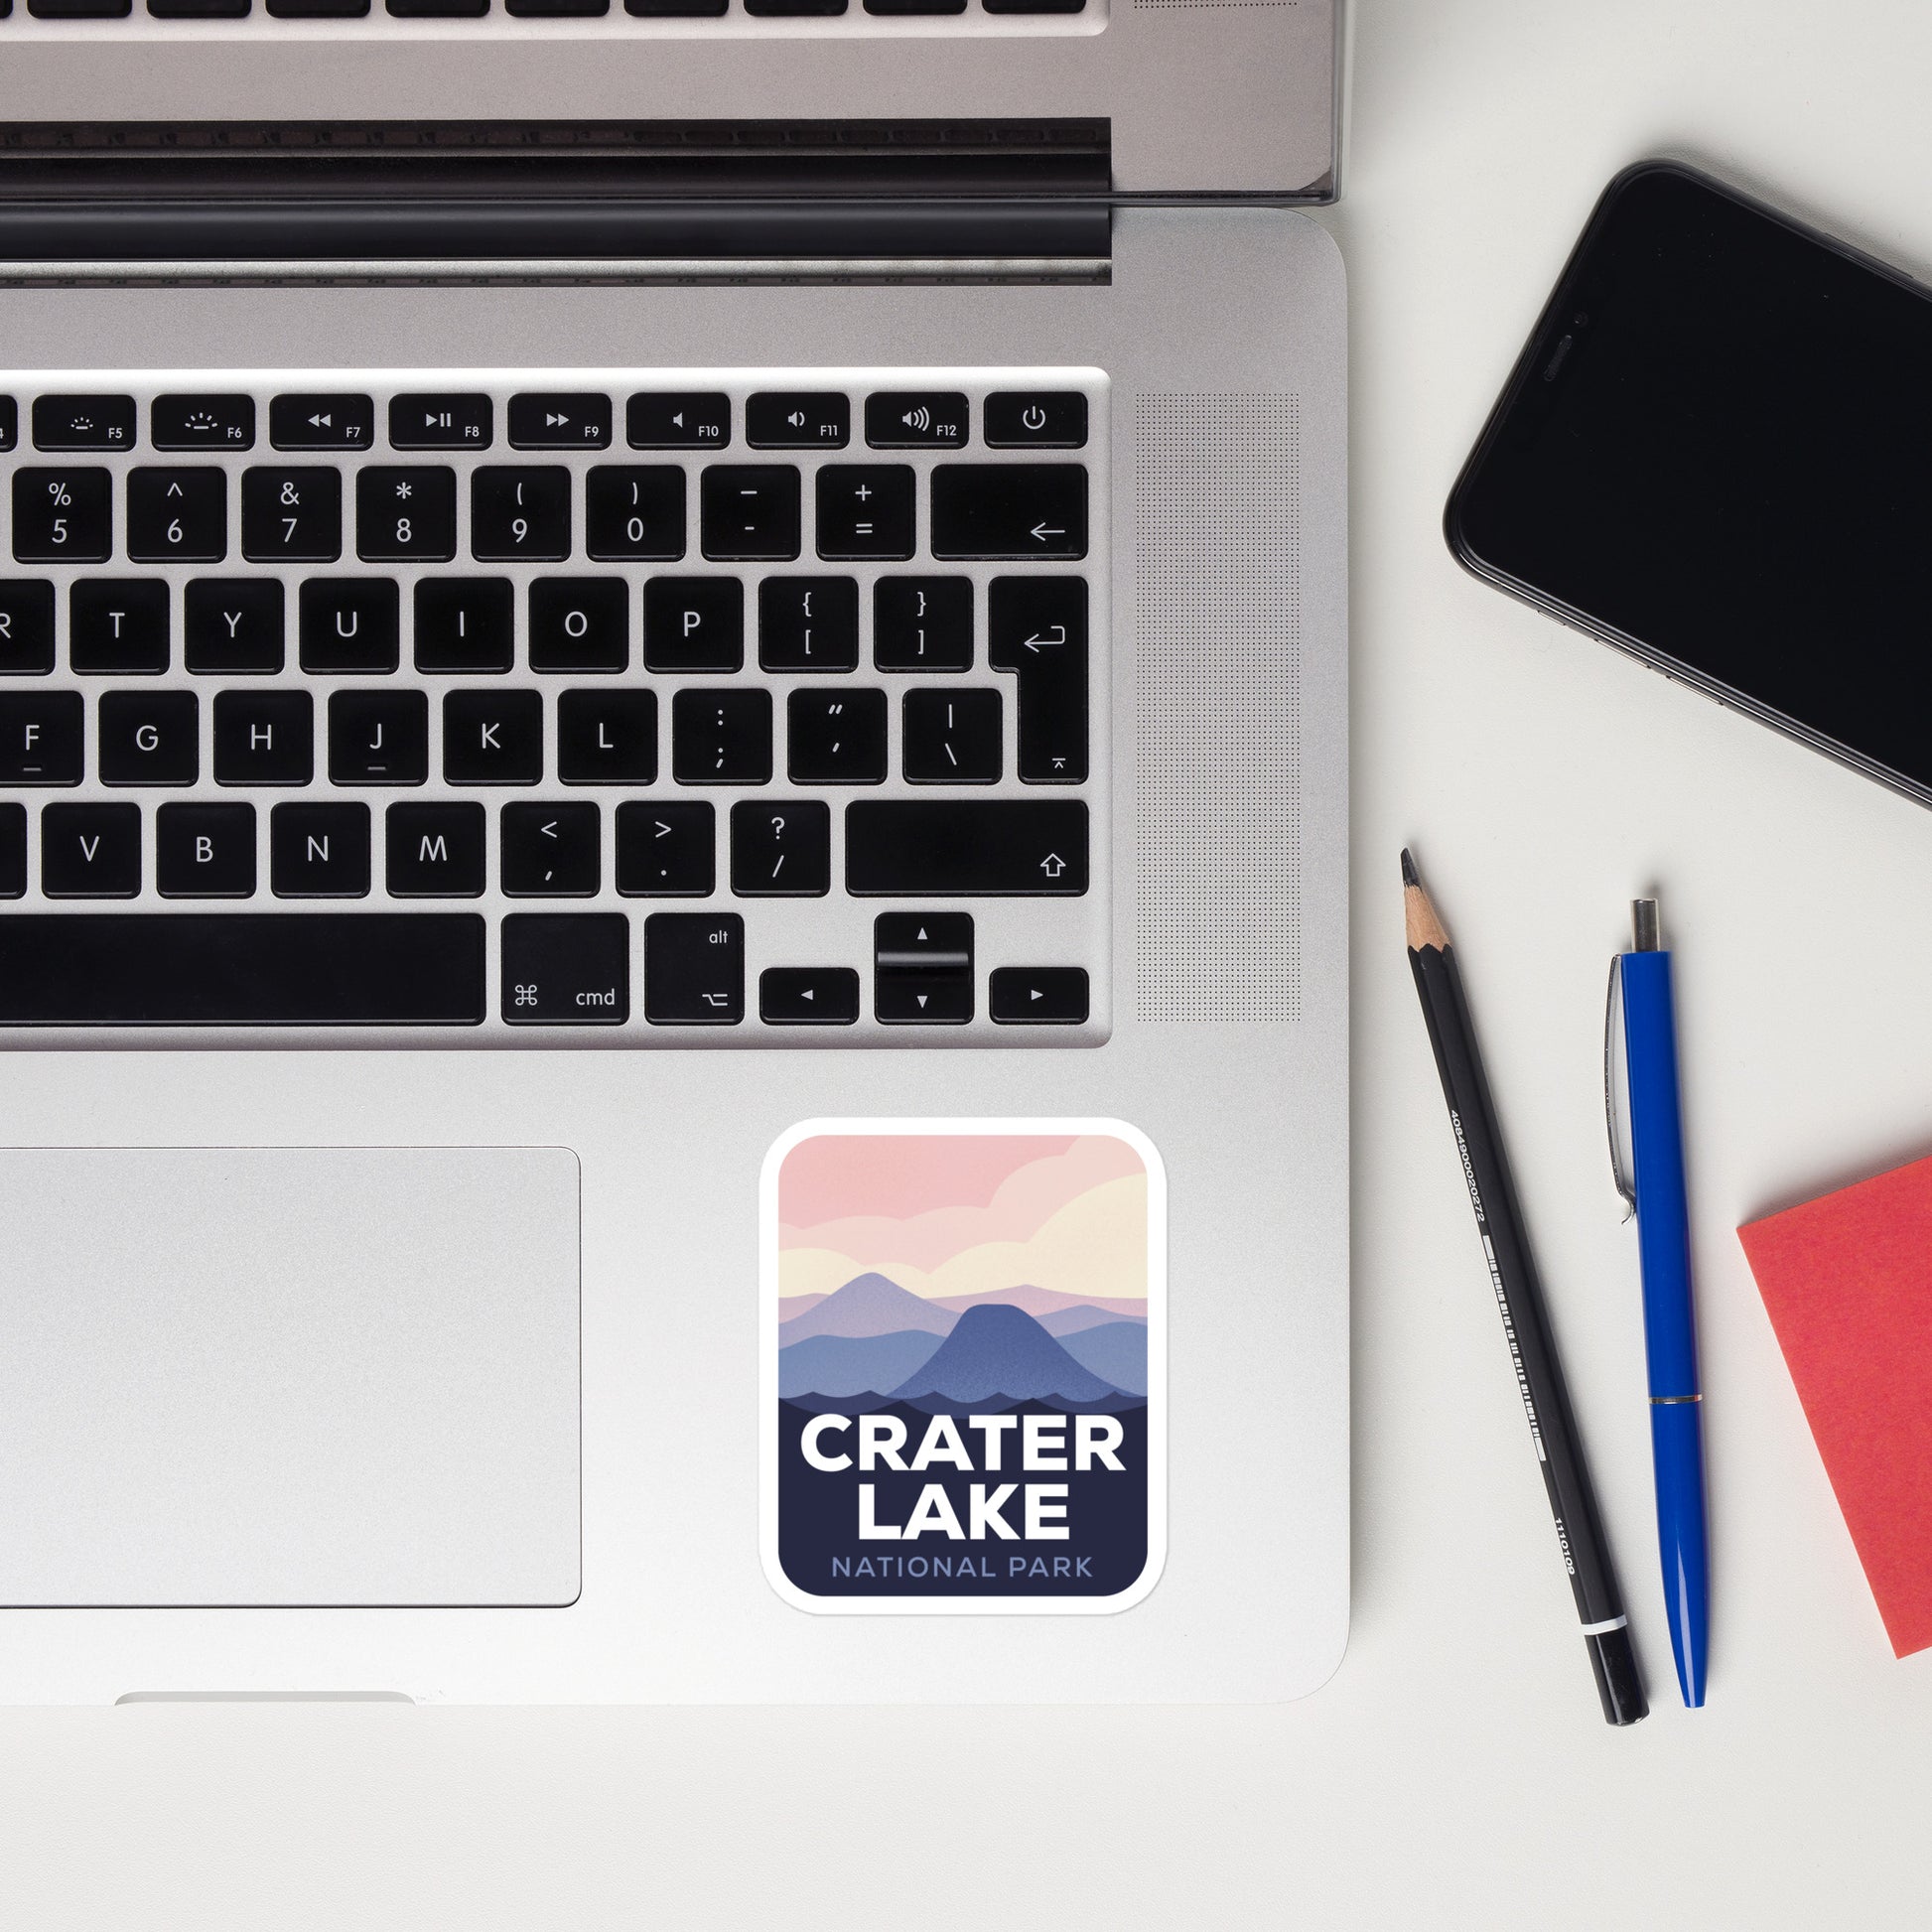 A sticker of Crater Lake National Park on a laptop